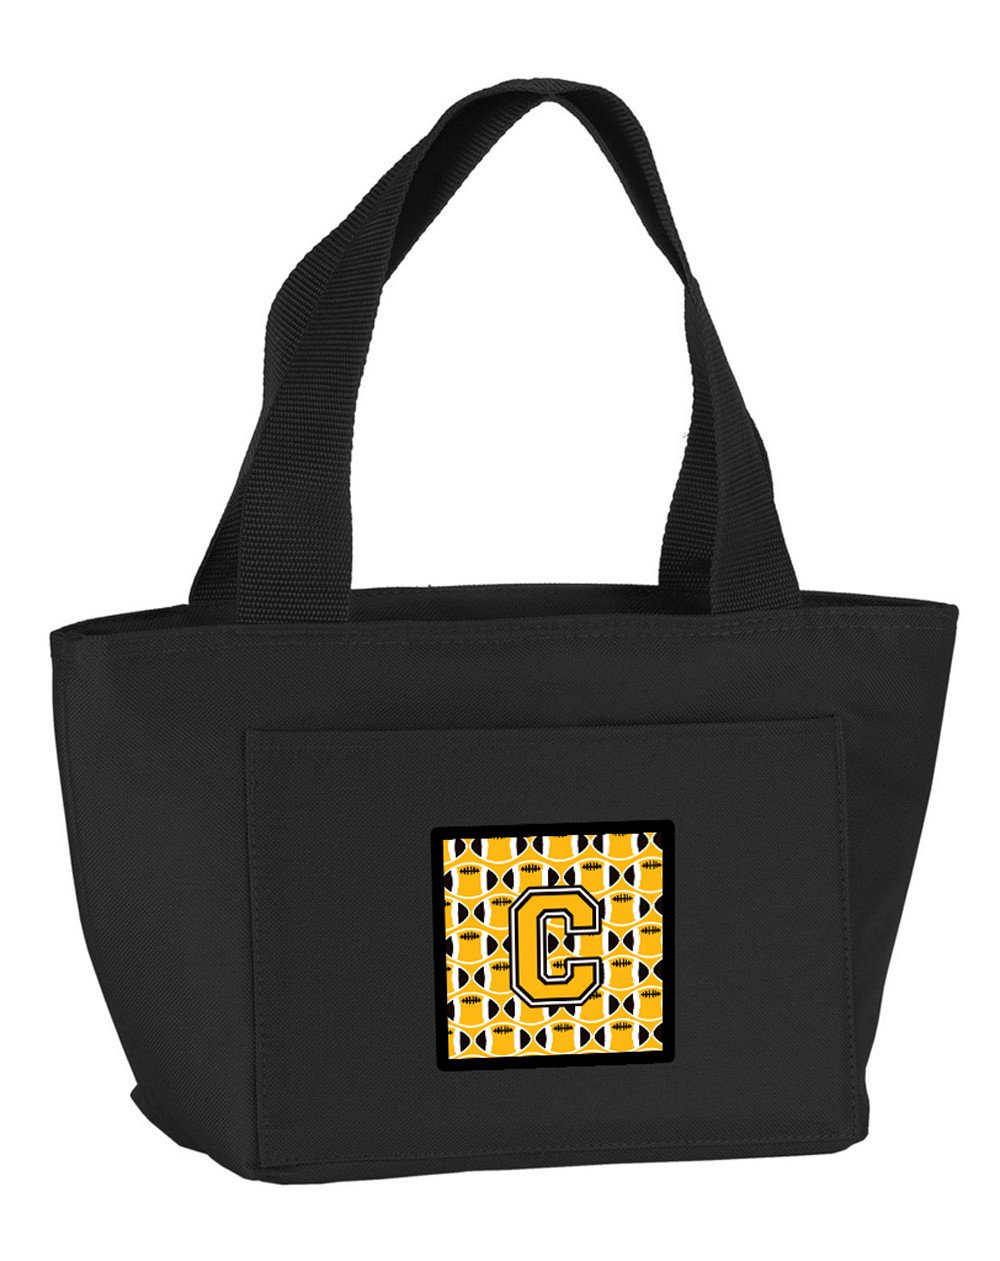 Letter C Football Black, Old Gold and White Lunch Bag CJ1080-CBK-8808 by Caroline's Treasures